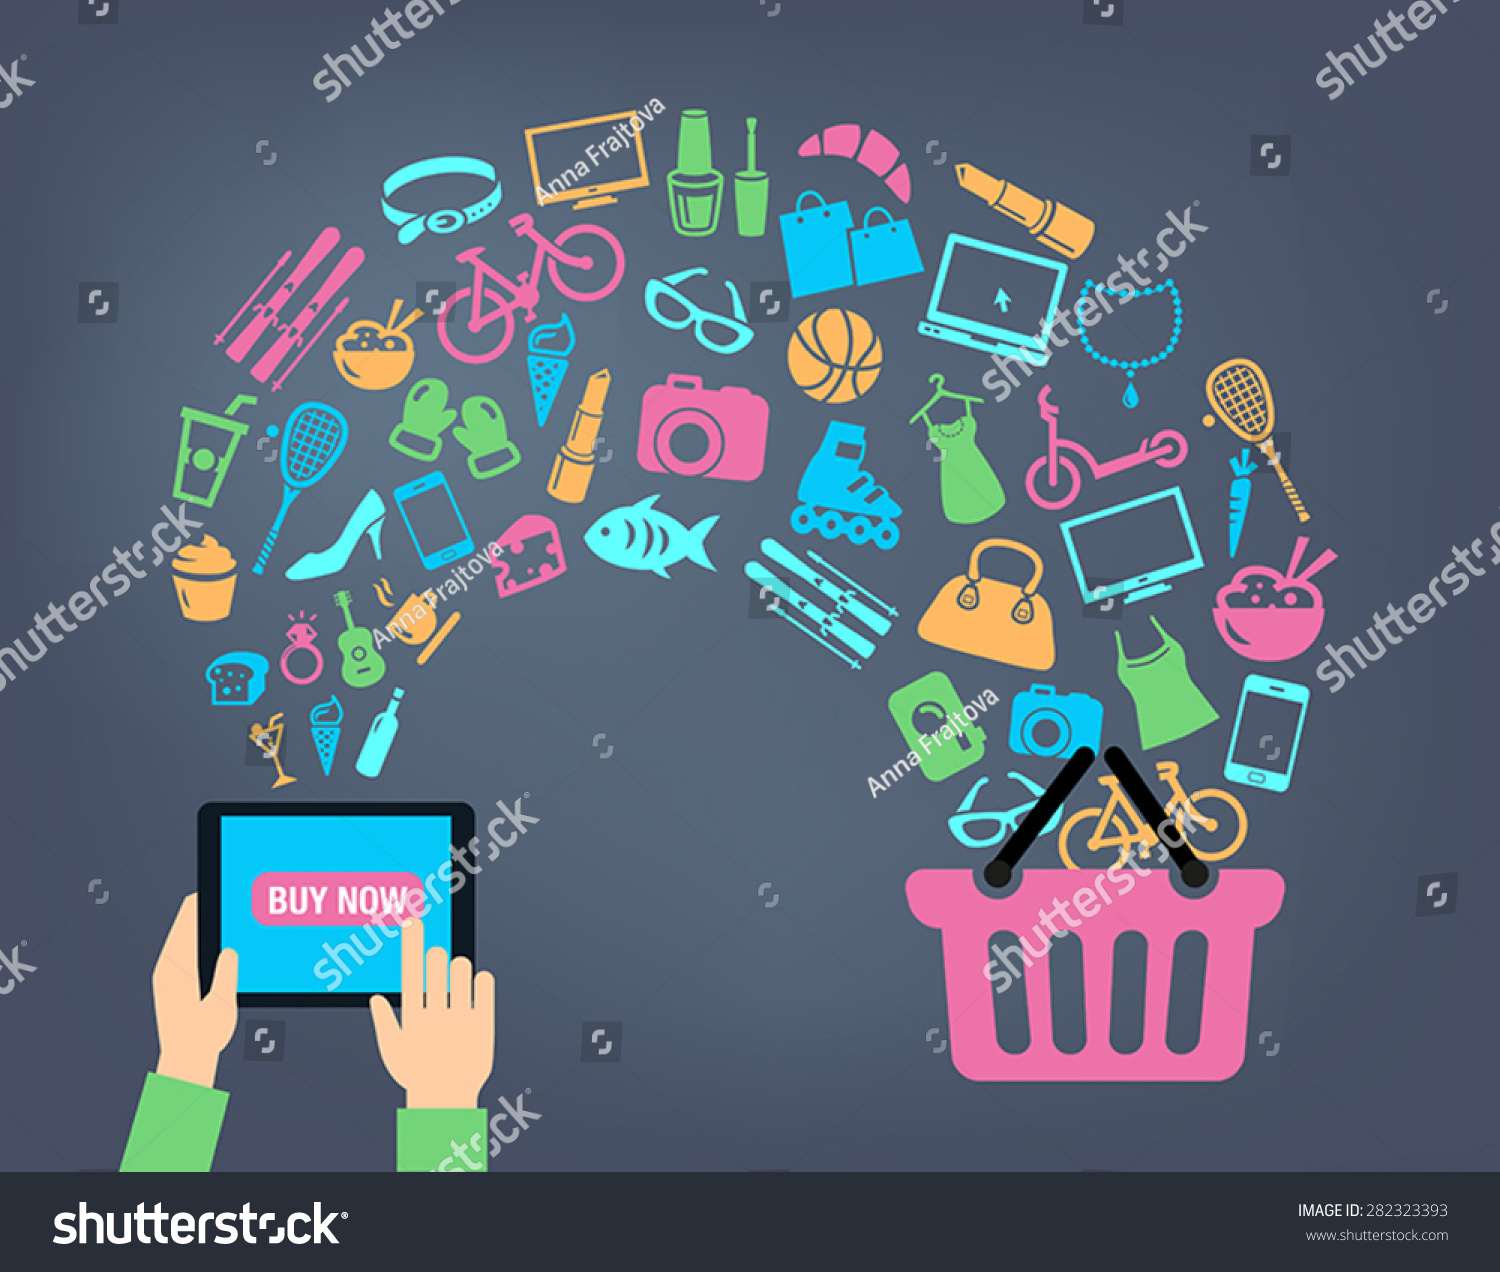 stock-vector-shopping-background-concept-with-icons-shopping-online-using-a-pc-tablet-or-a-smartphone-can-be-282323393.jpg